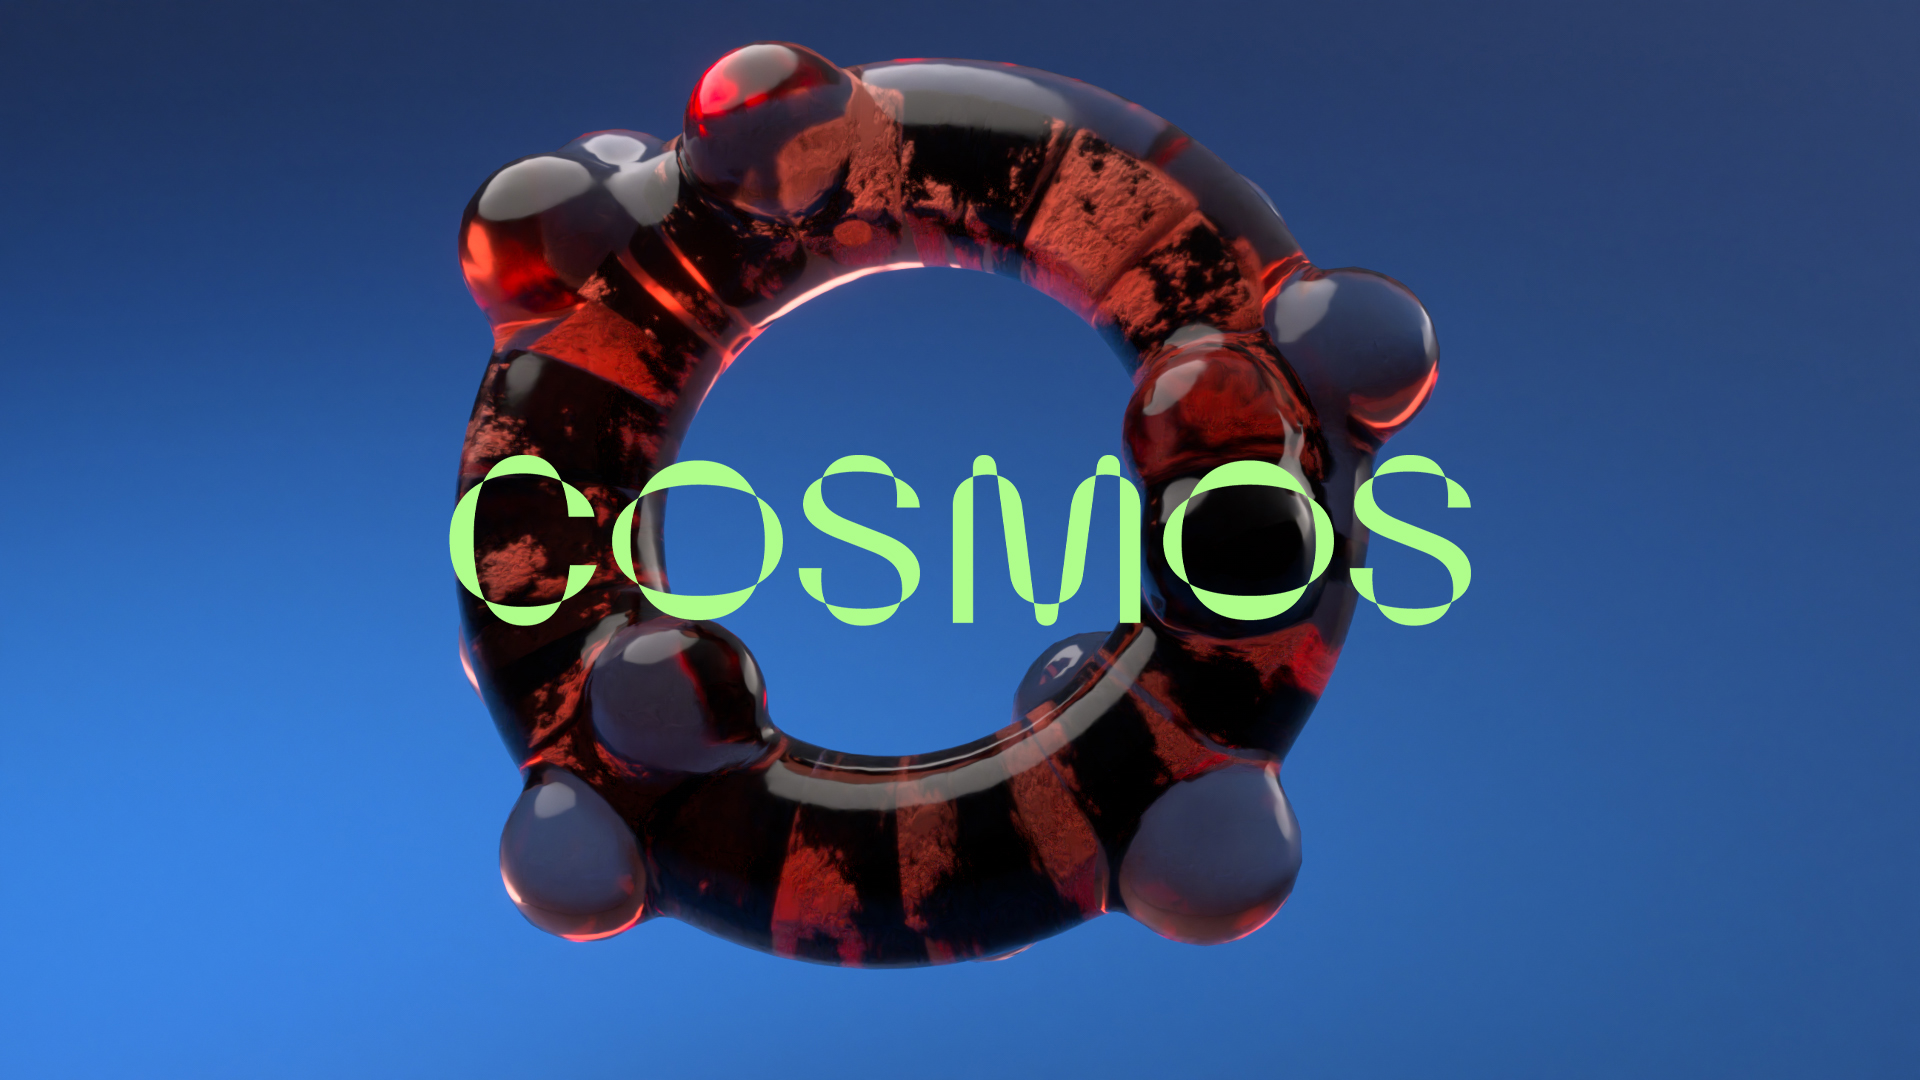 About Cosmos